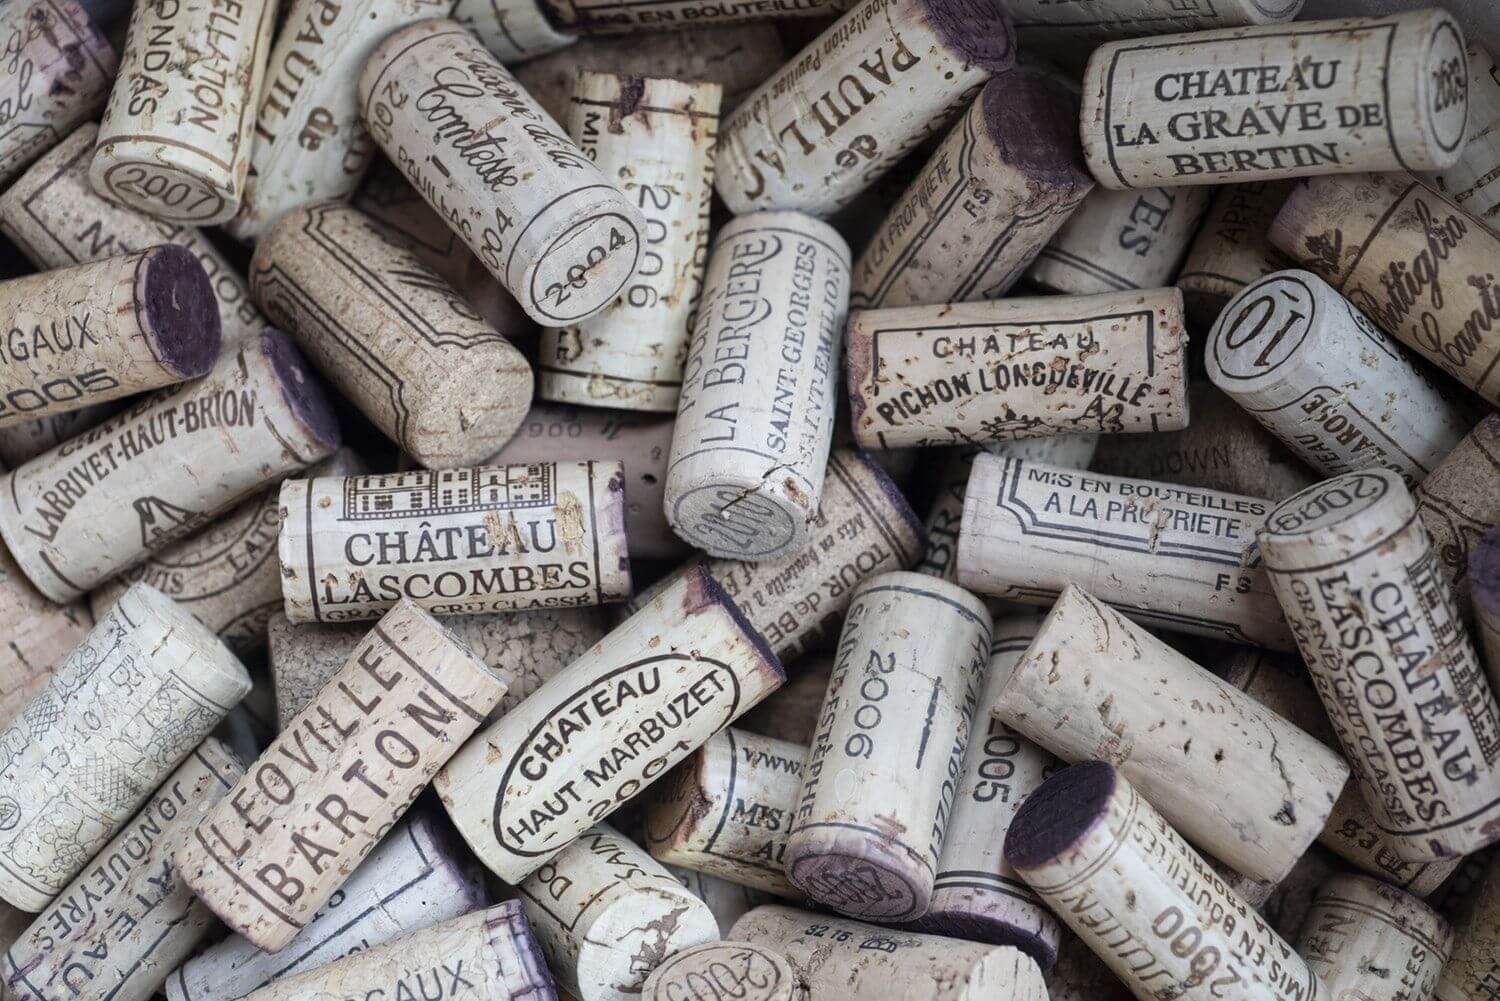 Corks cover the background